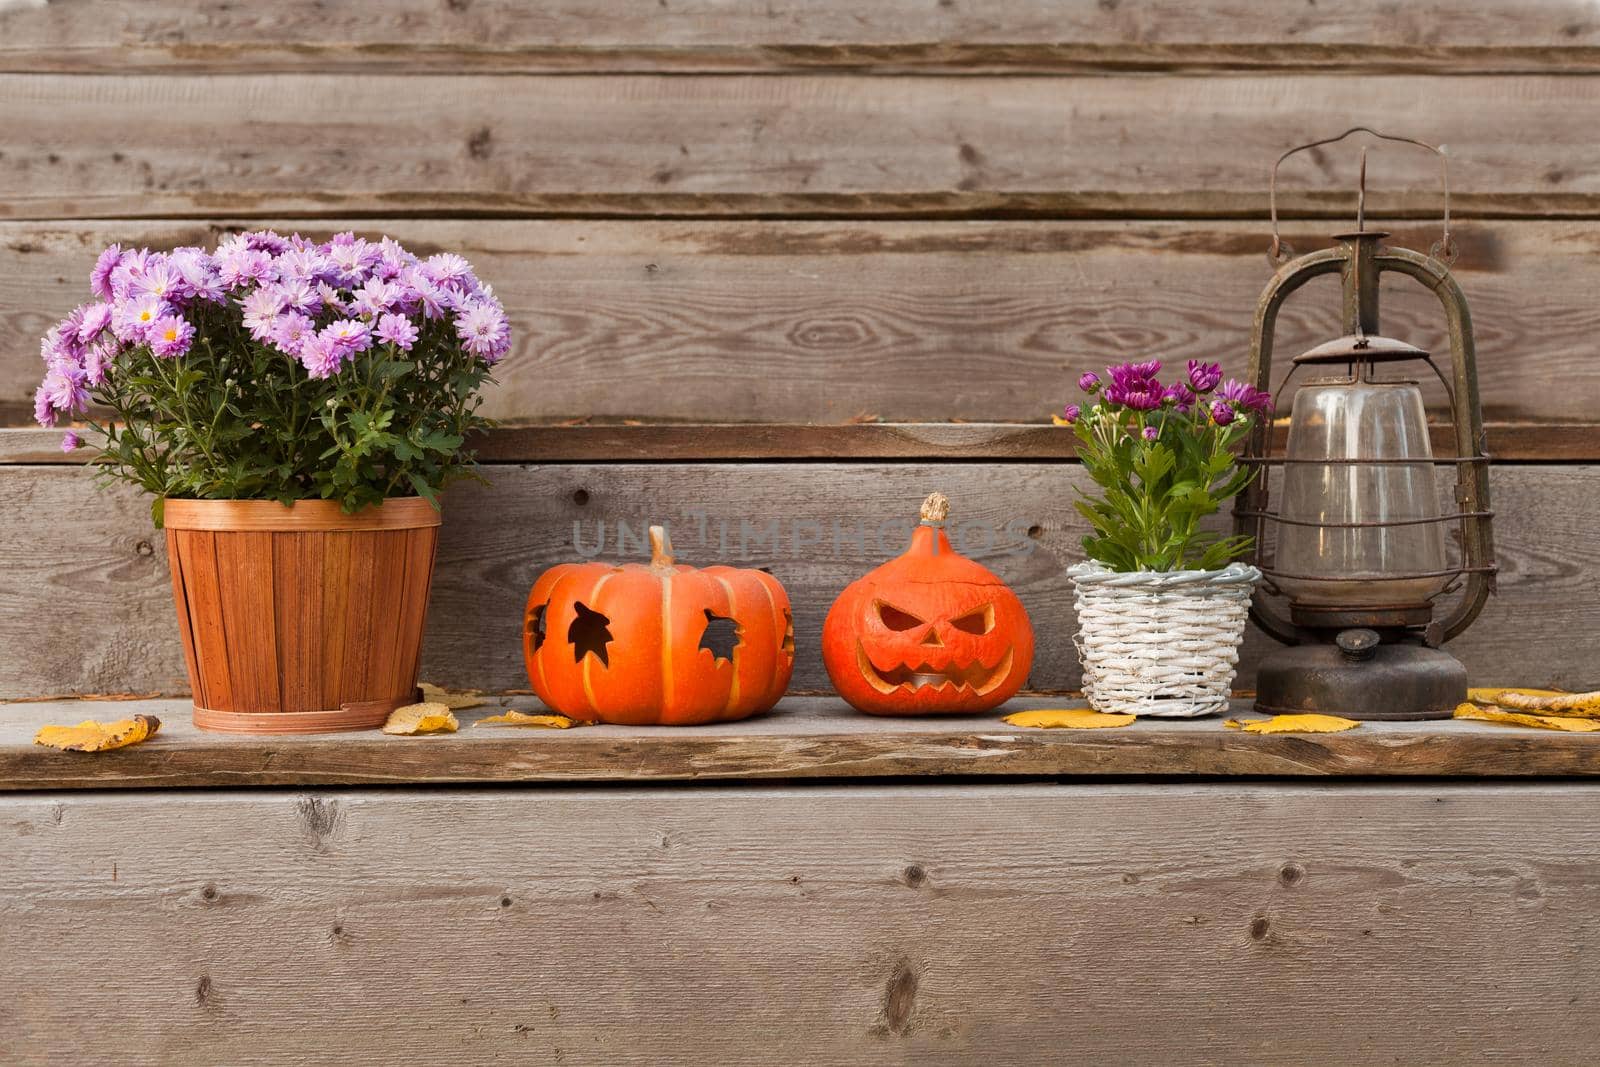 halloween pumpkins near flowers with old lantern on wooden stairs. garden decoration with yellow autumn leaves